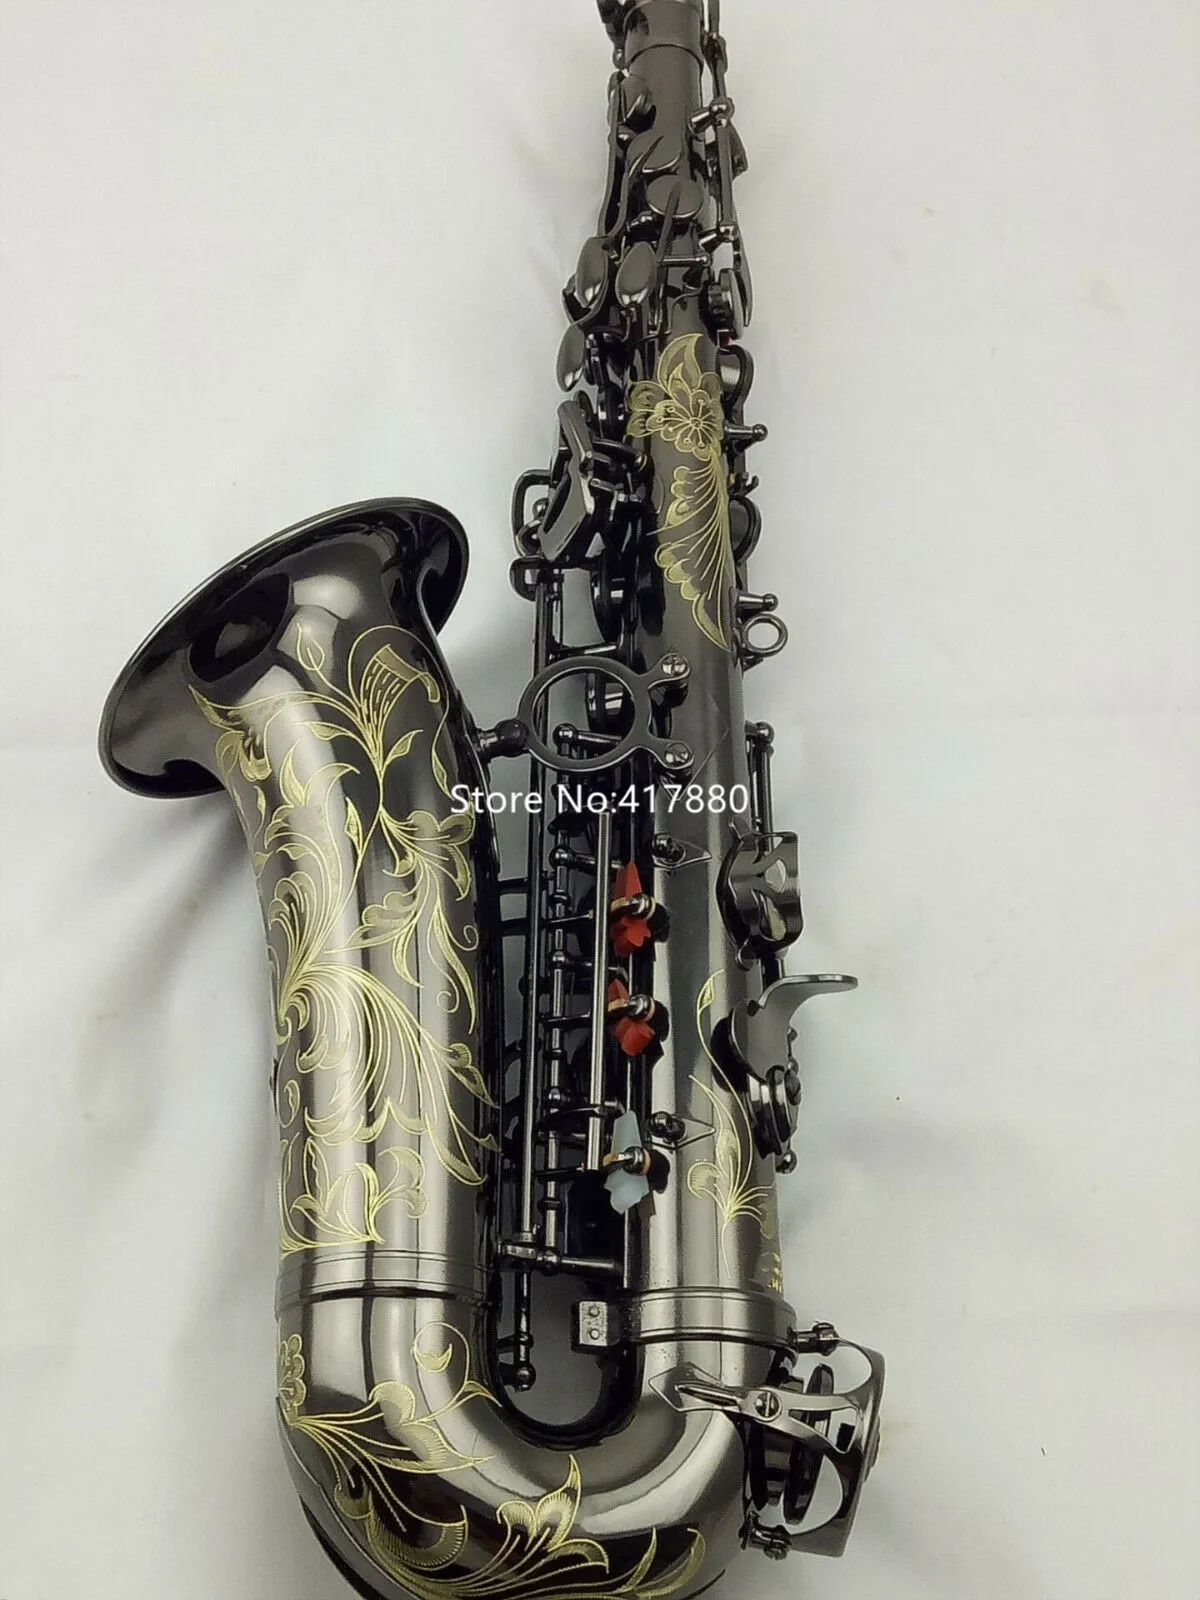 High Quality Eb Tune Alto Saxophone shiny black nickel plated Professional musical instrument with Case Free Shipping